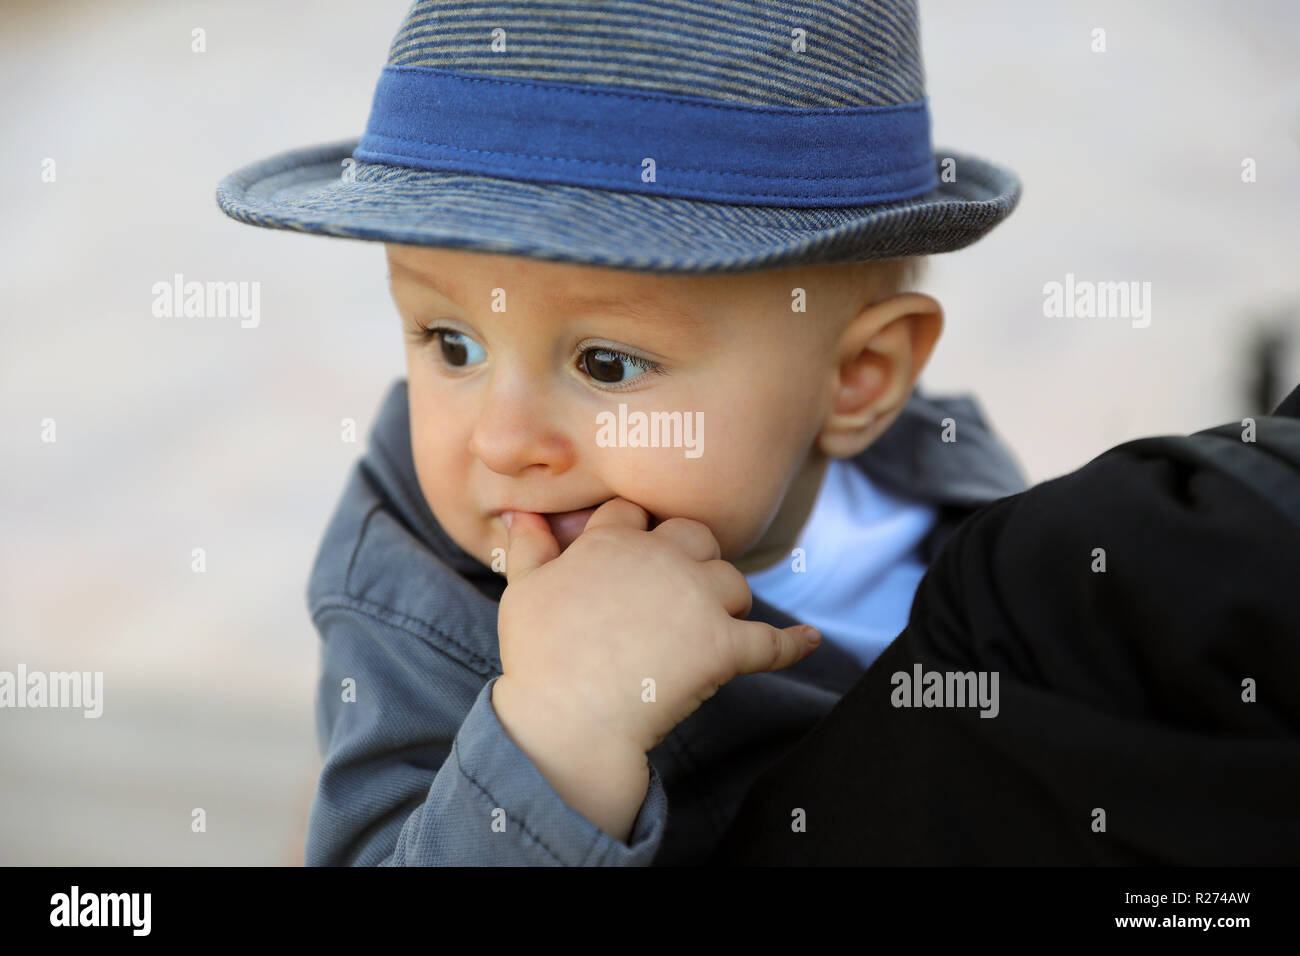 Beautiful Eleven Month Old Baby Boy With His Italian Hat And Suit Jacket.  Close Up View Portrait Stock Photo - Alamy